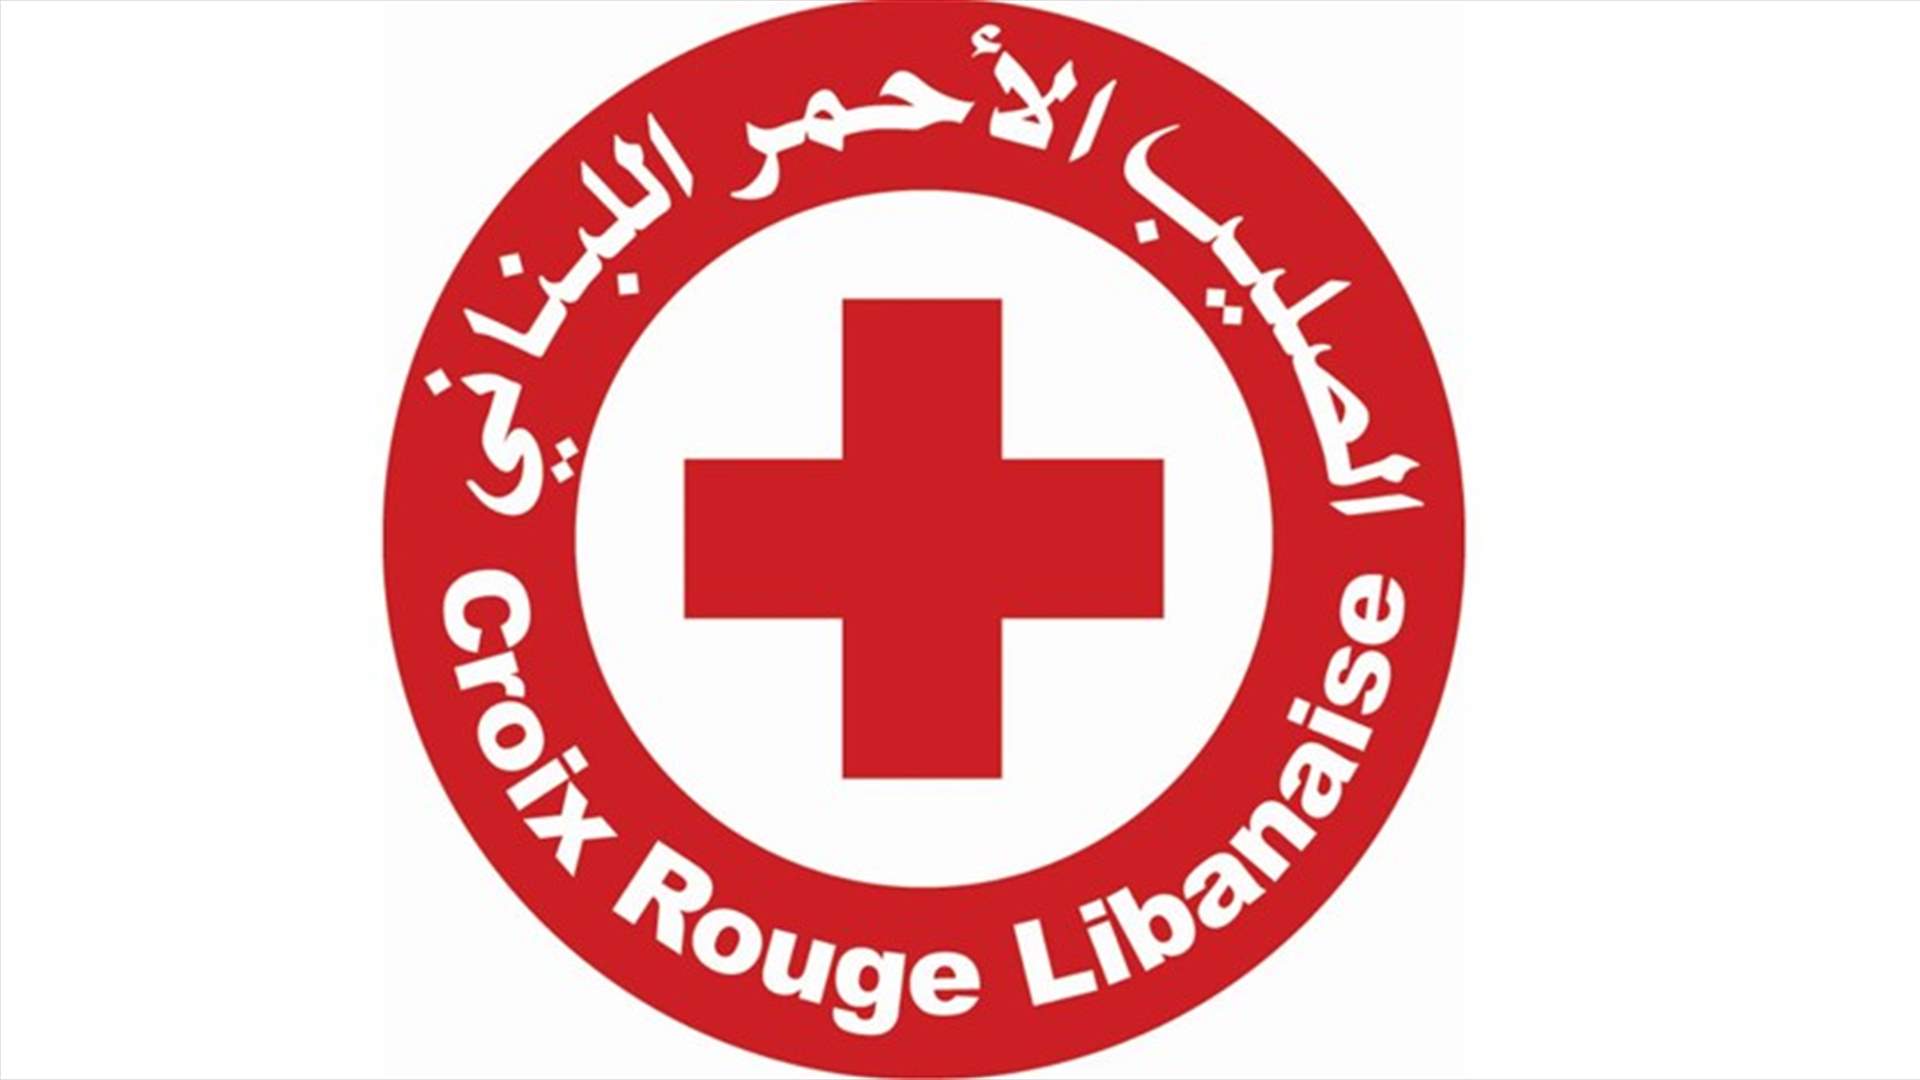 The Lebanese Red Cross needs our help!